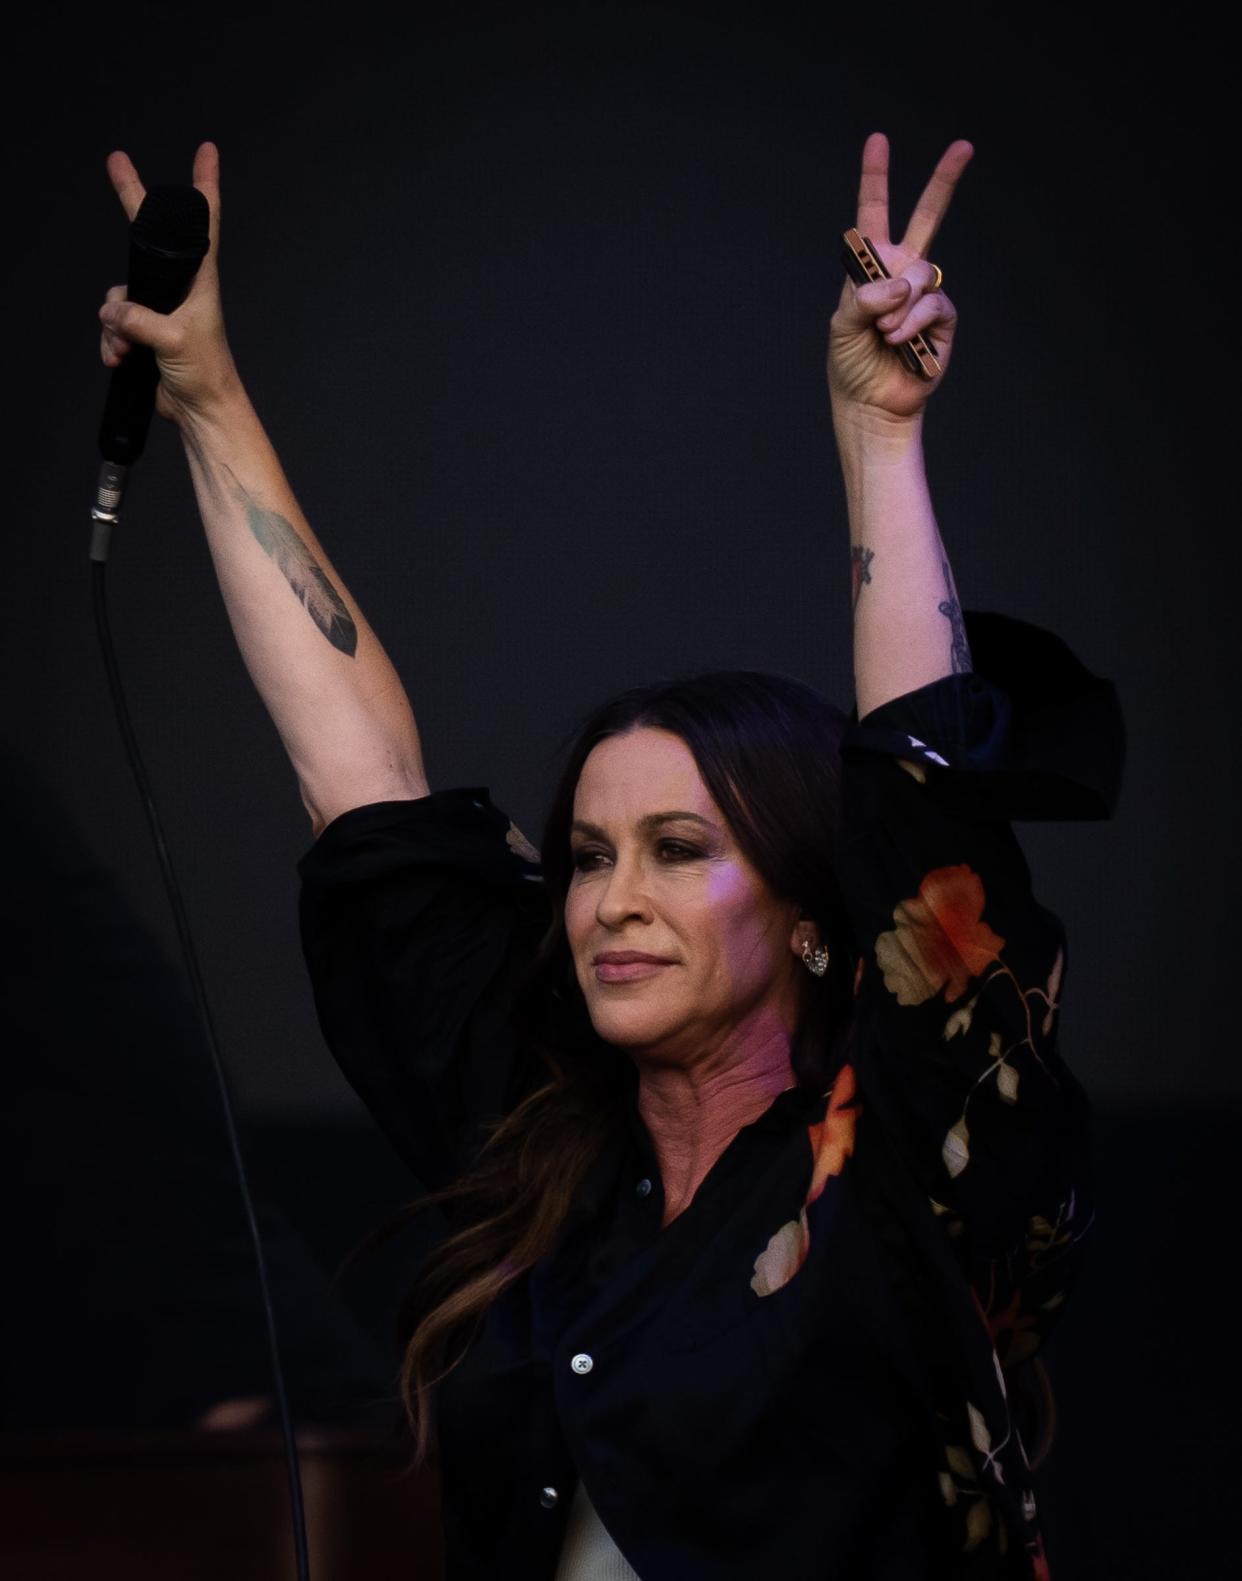 Alanis Morissette performs in Austin on Oct. 7. She's scheduled to perform at the American Family Insurance Amphitheater July 28 with Joan Jett and Morgan Wade opening.